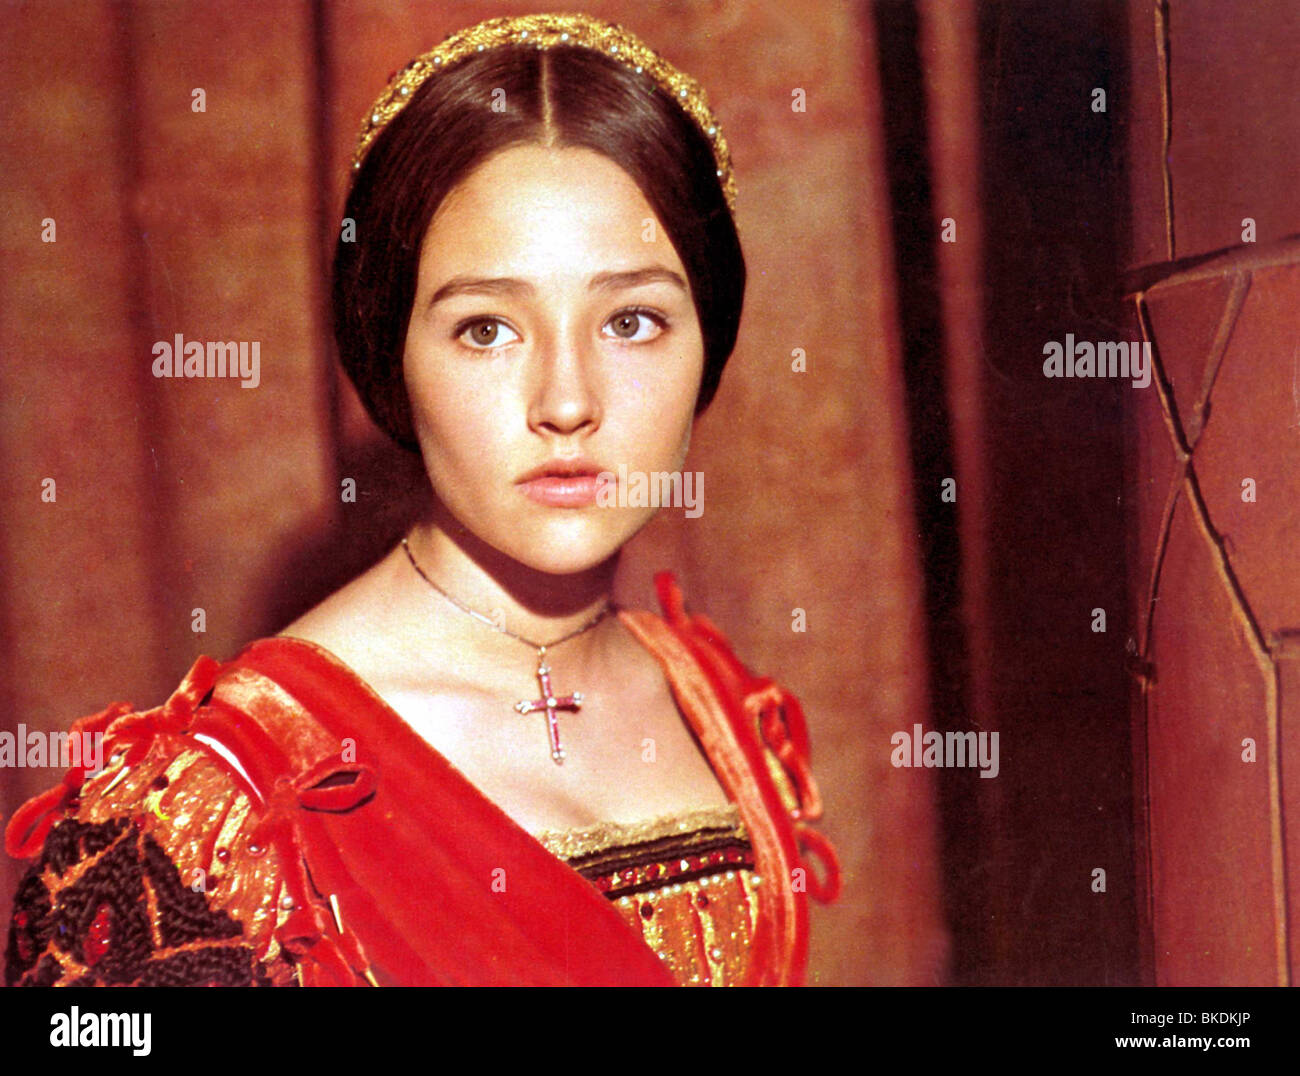 ROMEO AND JULIET (1968) OLIVIA HUSSEY RMJ 010FOH Stock Photo